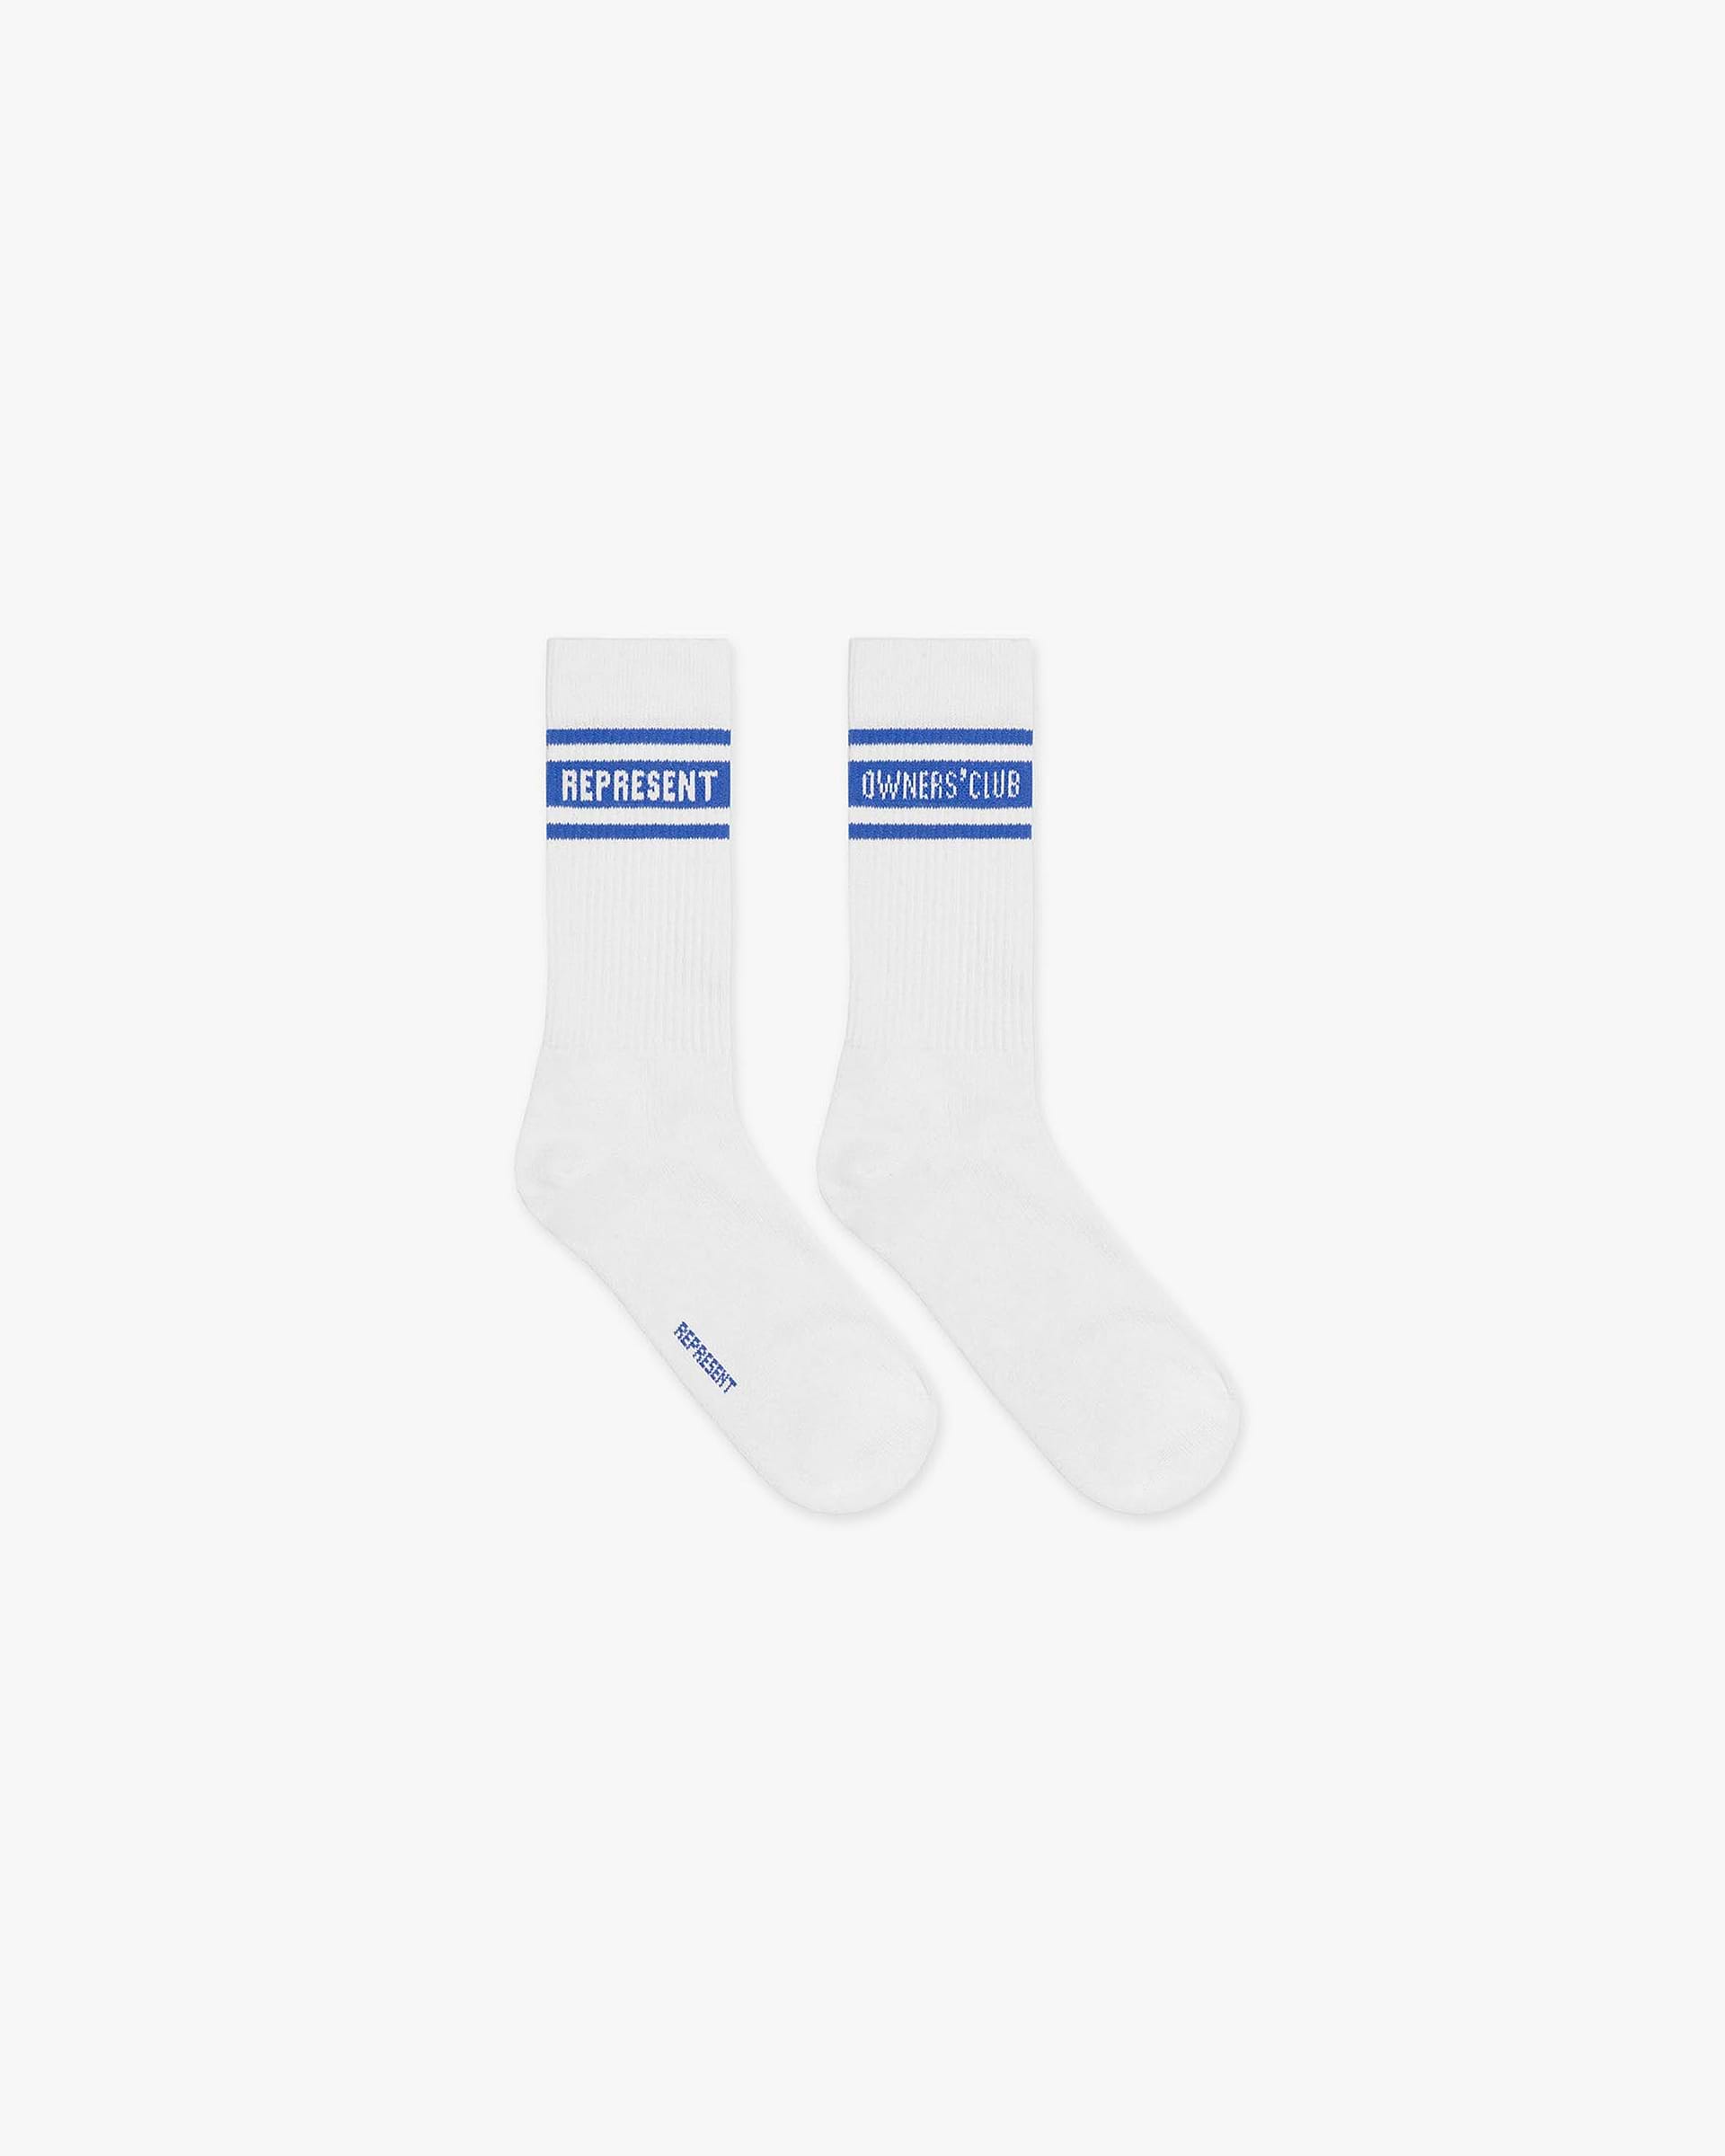 Represent Owners Club Socks | Flat White/Cobalt Accessories Owners Club | Represent Clo